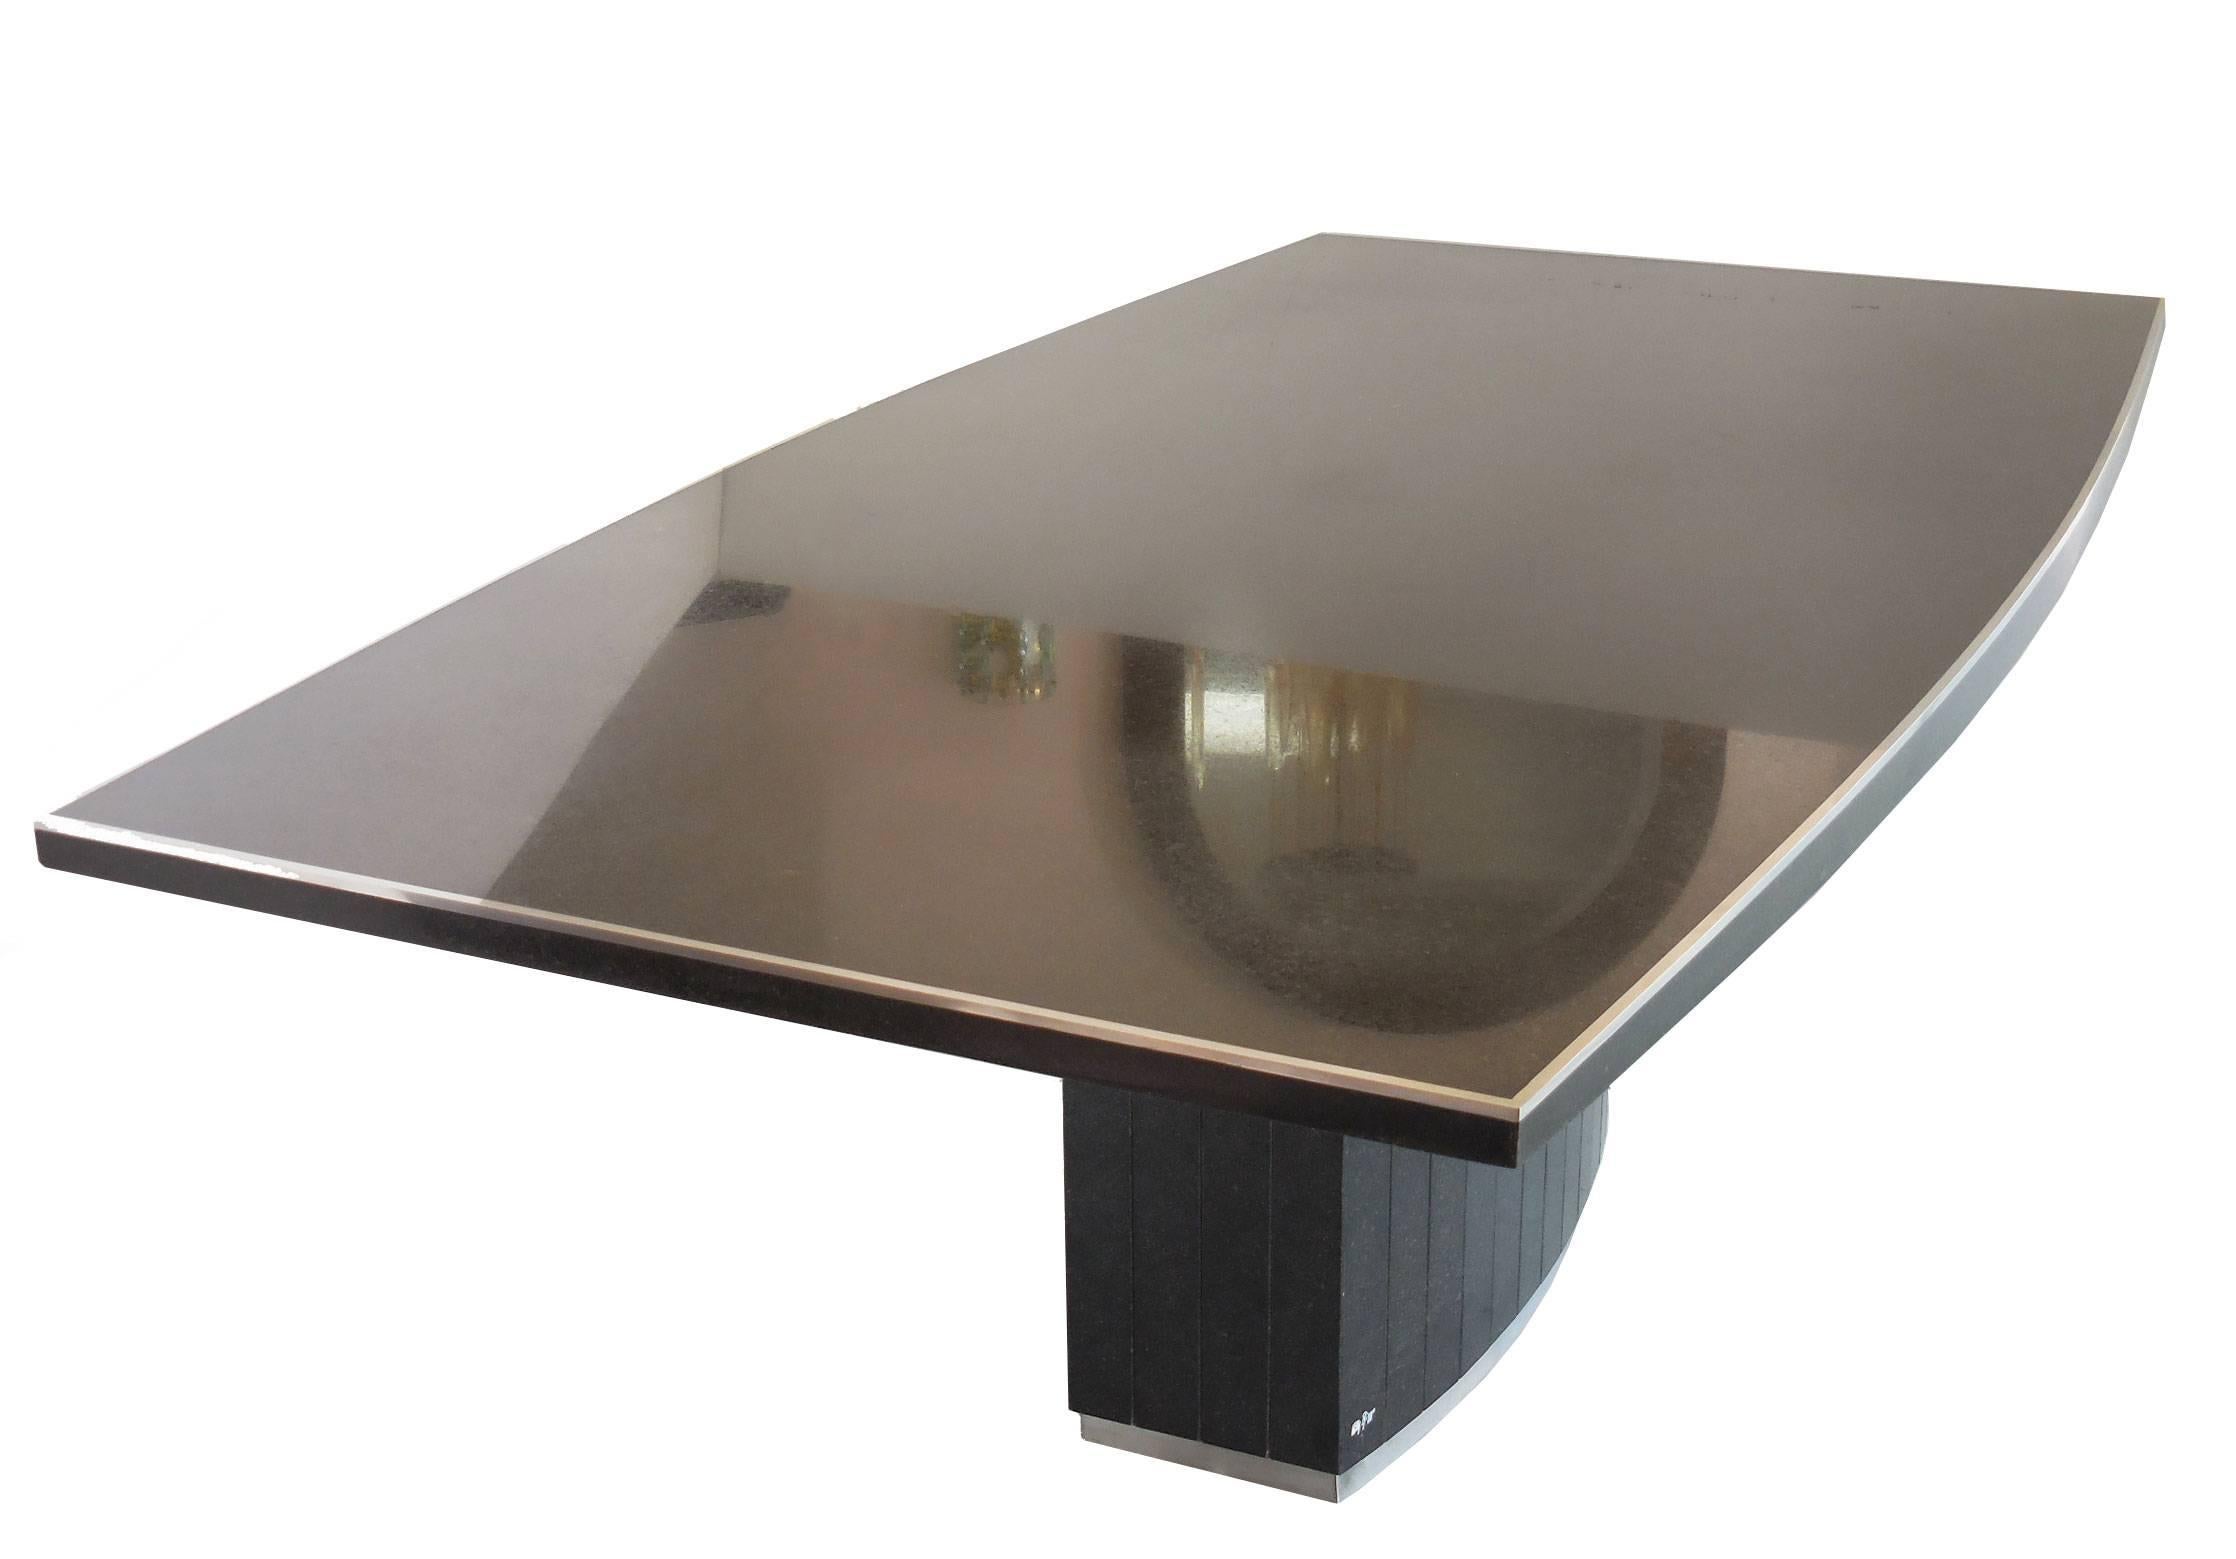 Stunning table by Willy Rizzo. Black granite with stainless steel trim. Note the subtle elliptical shape of the top. Signed "Willy Rizzo" on base.